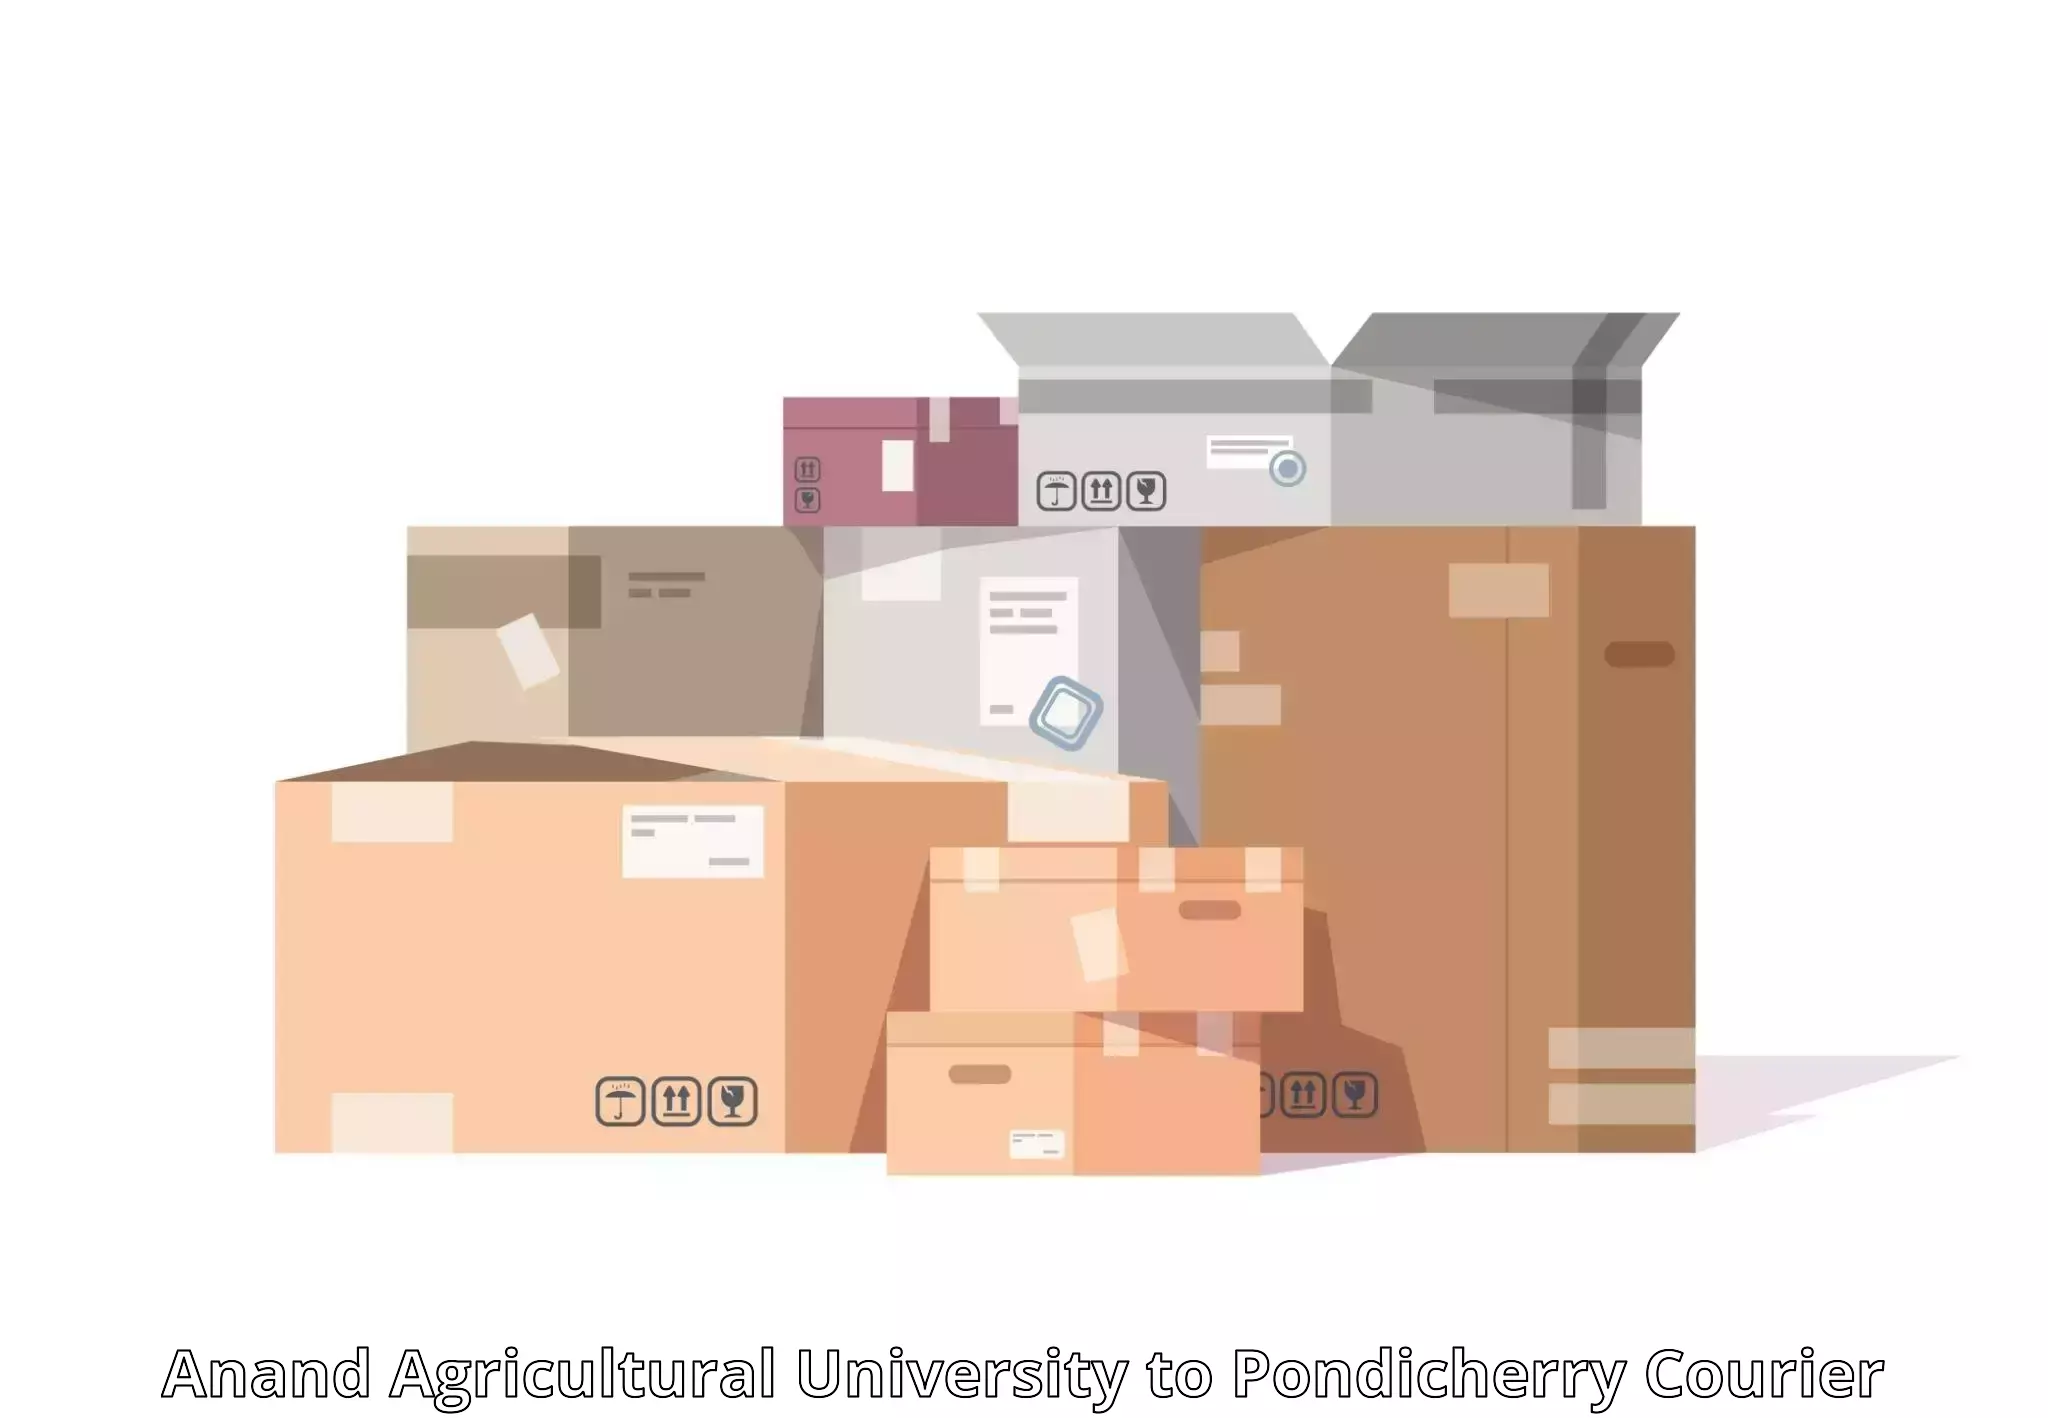 Overnight delivery Anand Agricultural University to Pondicherry University